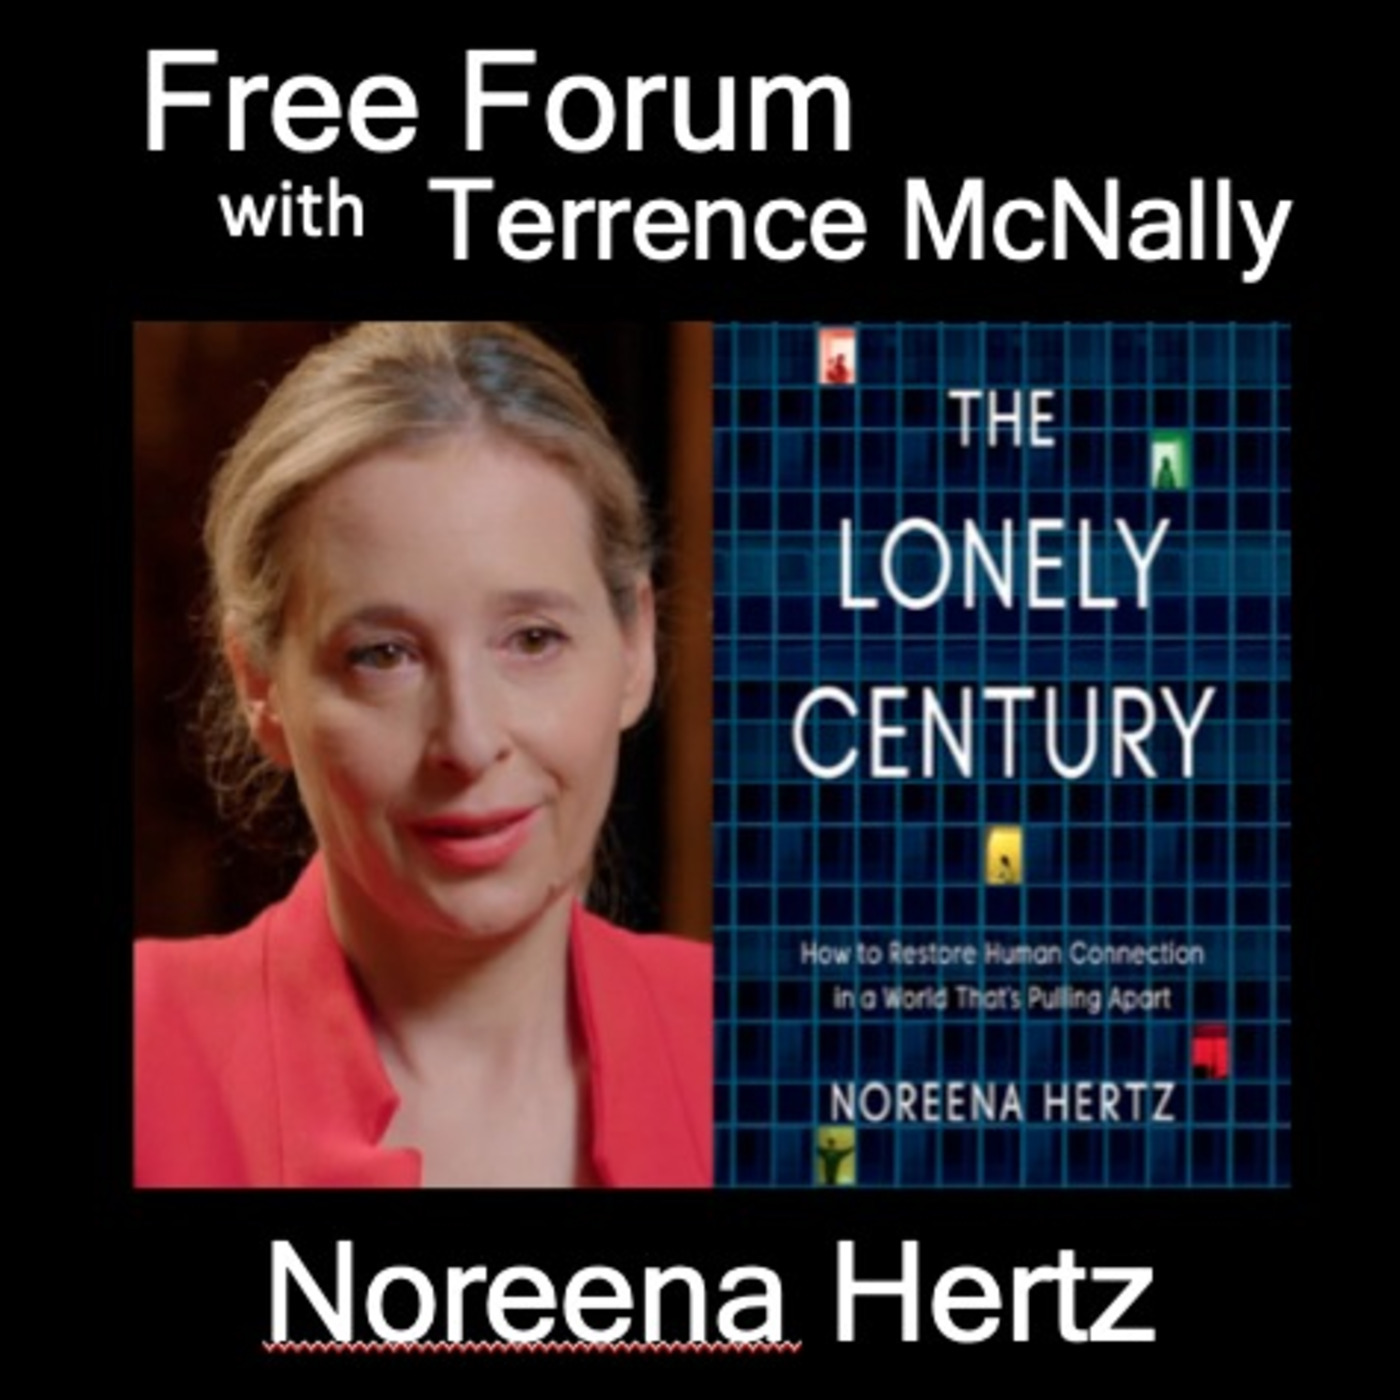 Episode 501: NOREENA HERTZ-THE LONELY CENTURY - How do we restore human connection?